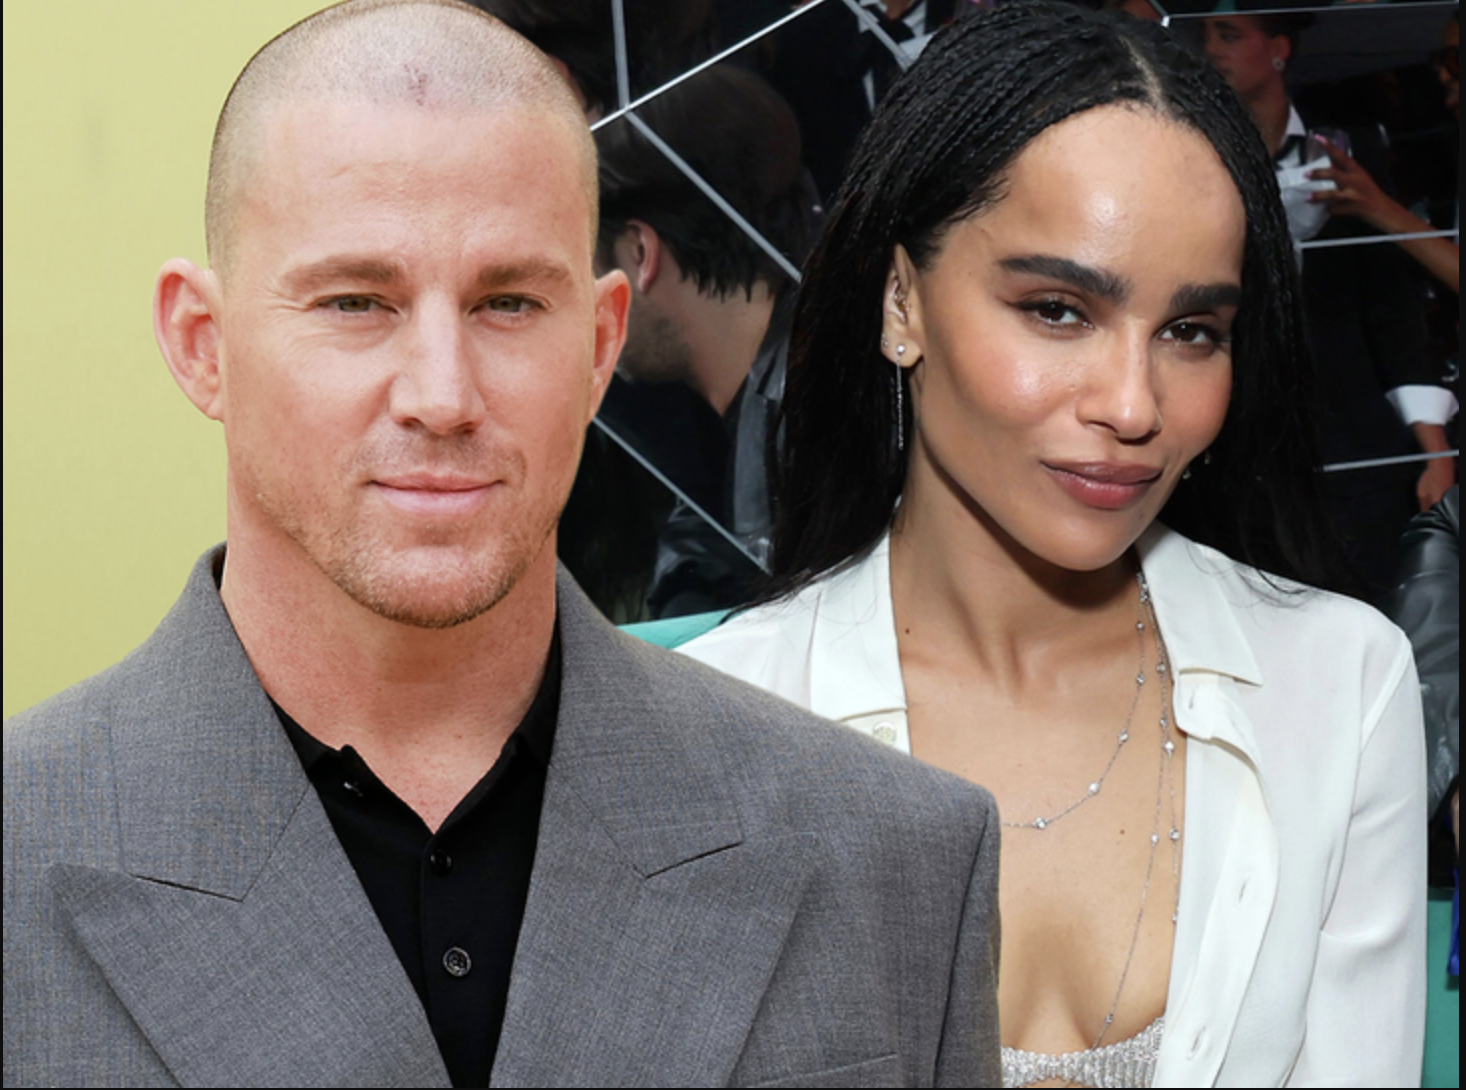 Channing Tatum and Zoë Kravitz Take the Next Step: Engaged After 2 Years of Love!